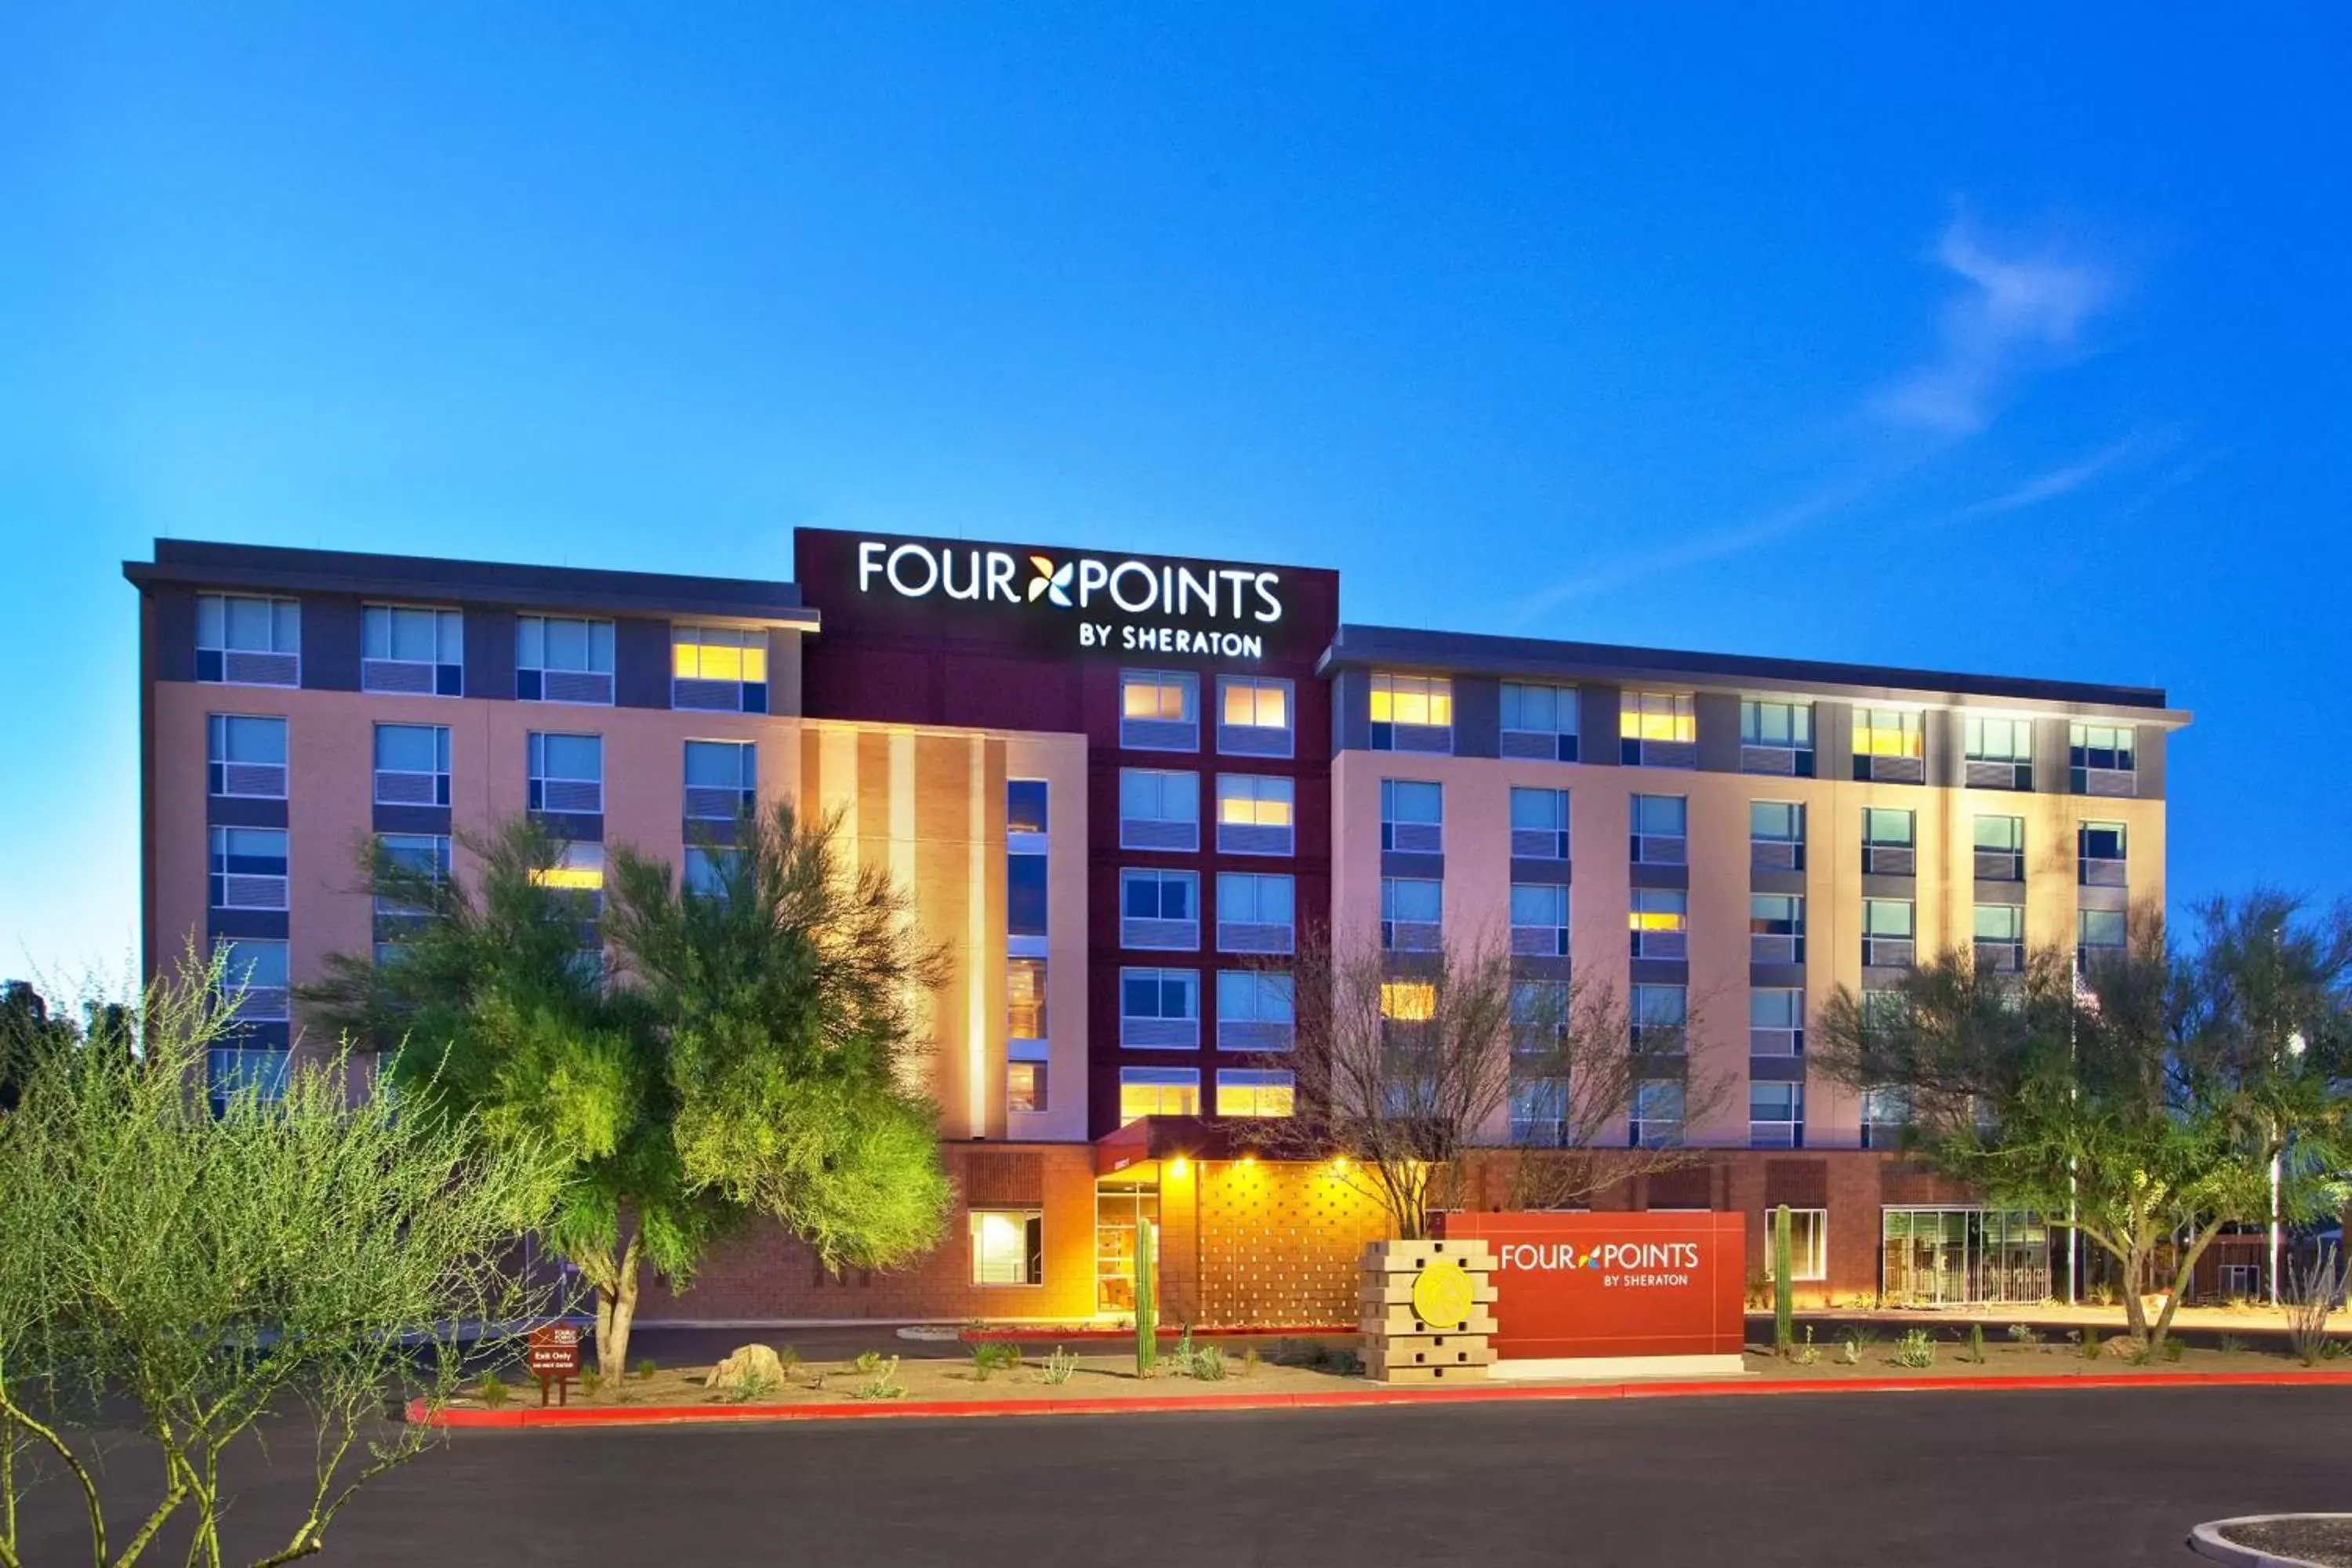 Property Building in Four Points by Sheraton at Phoenix Mesa Gateway Airport